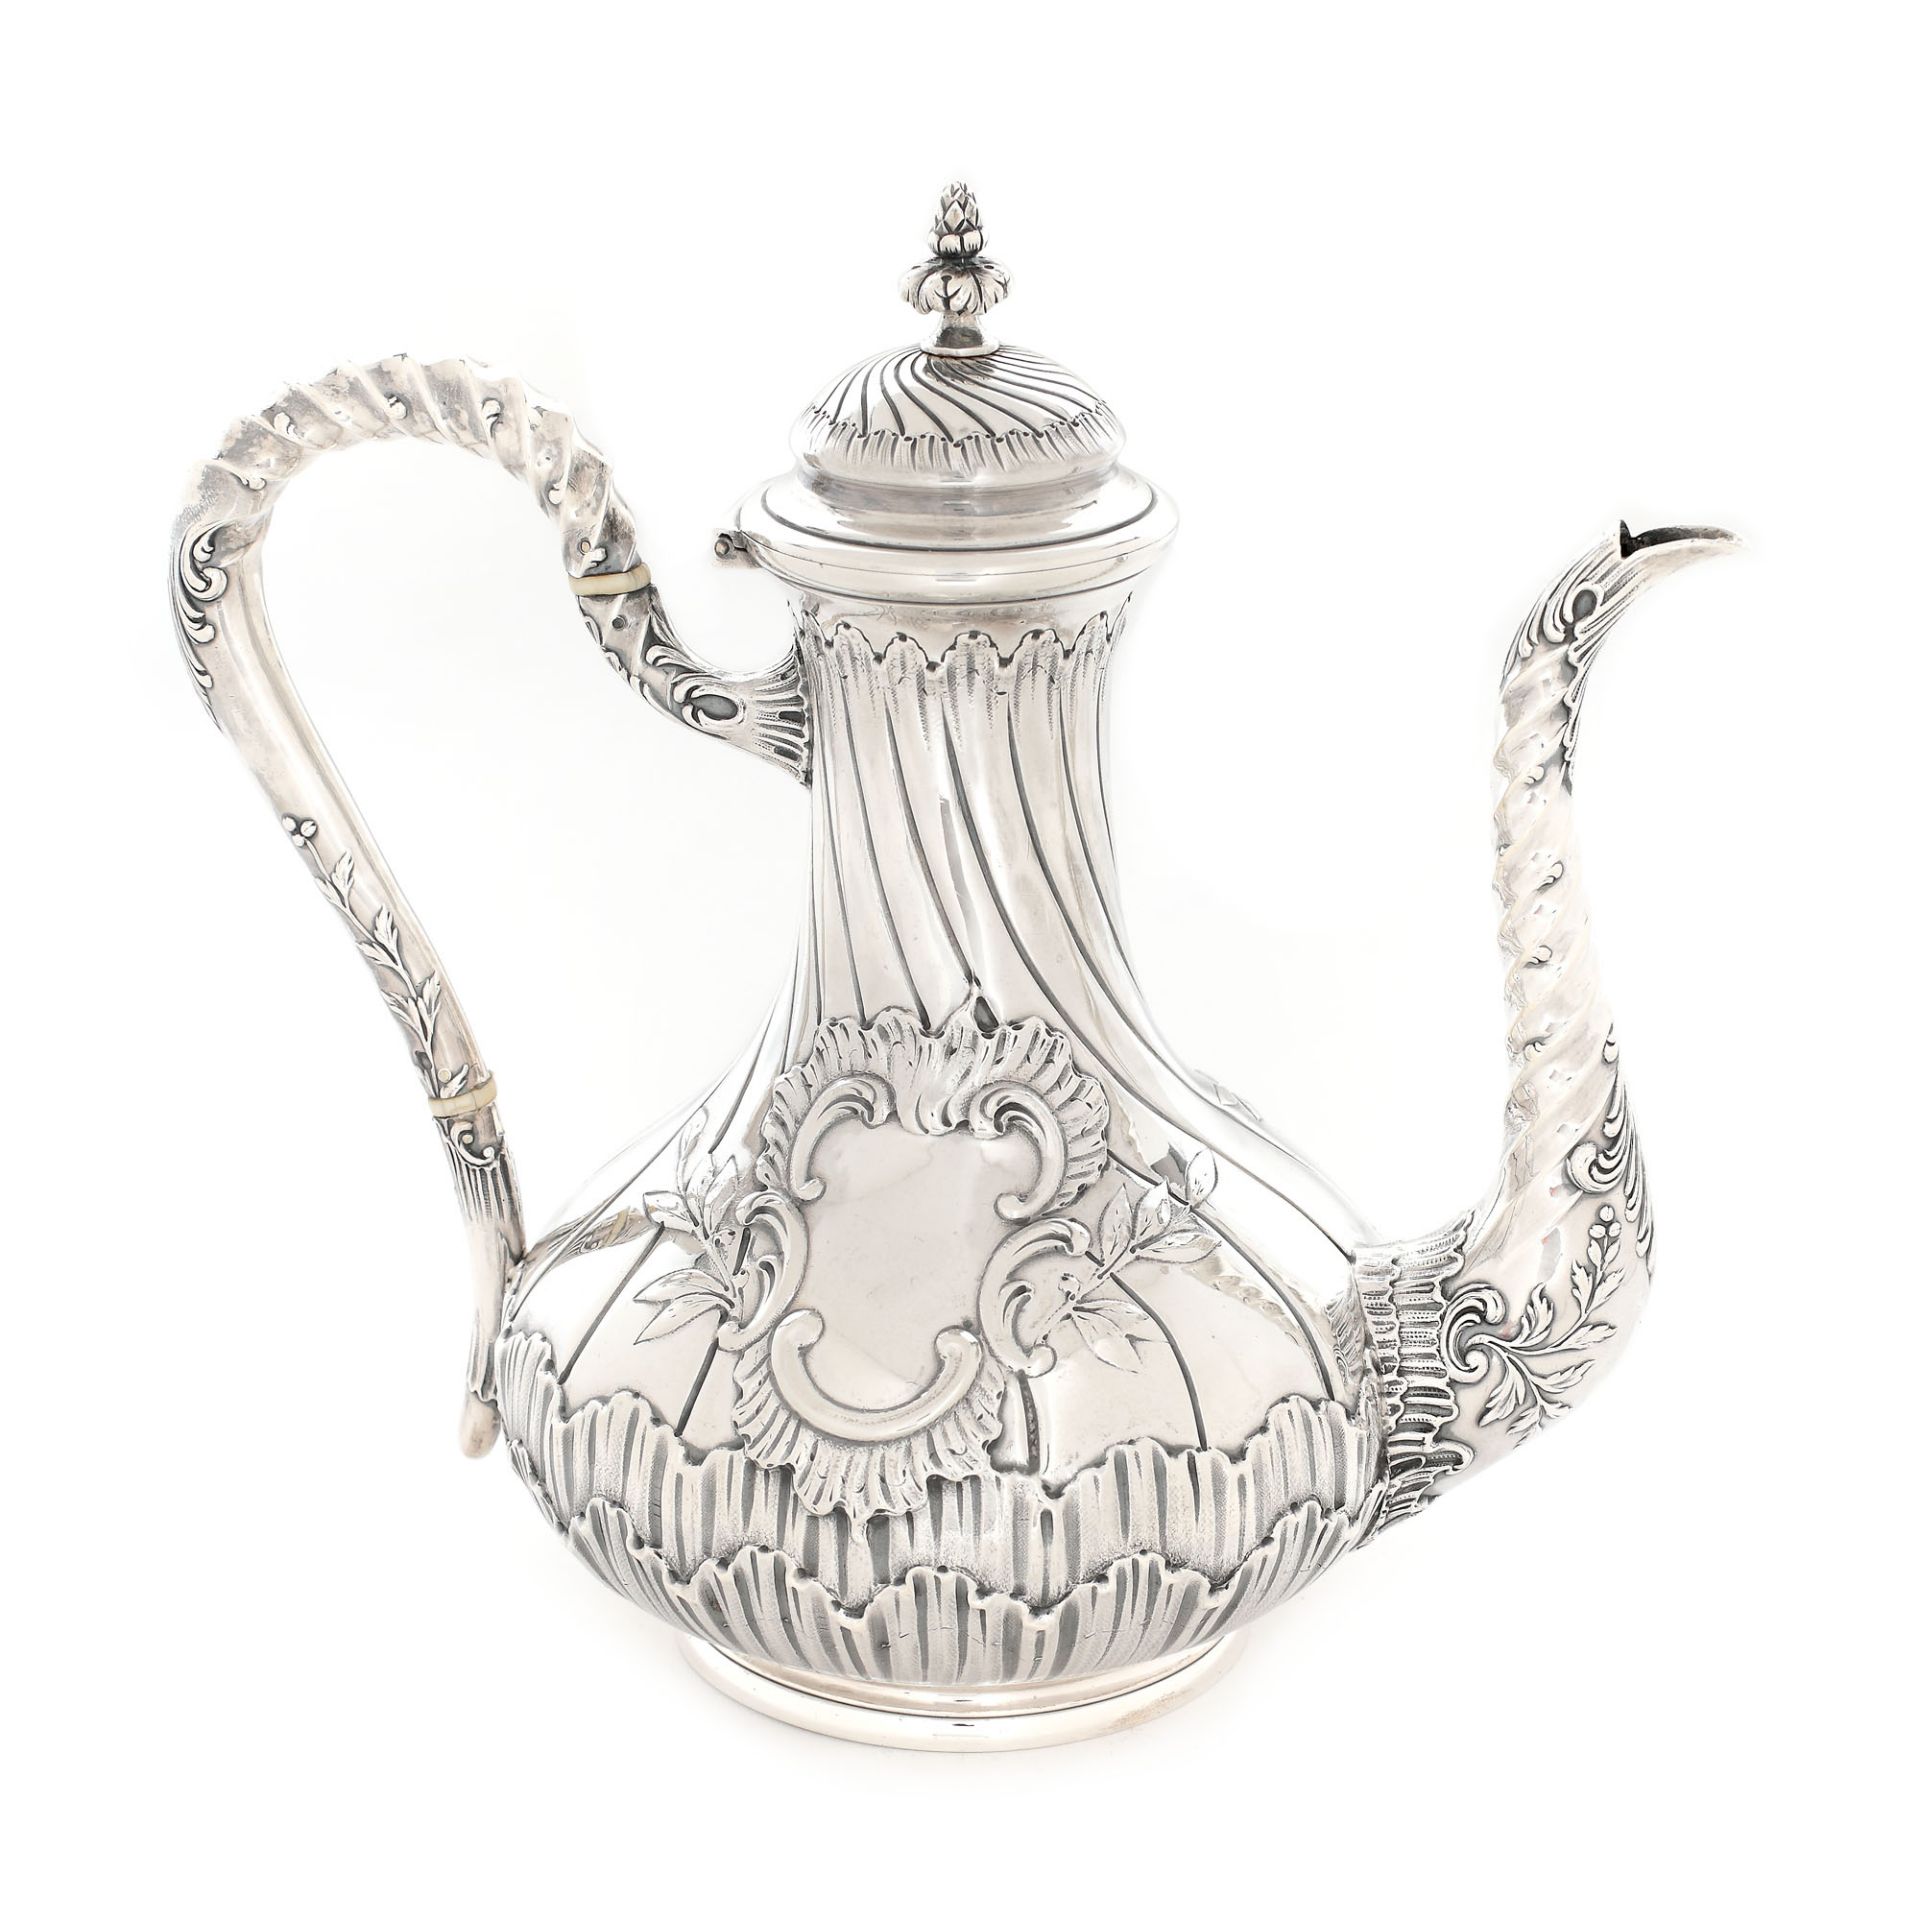 French workshop, Orientalist-inspired Risler & Carre silver teapot, approx. 1900